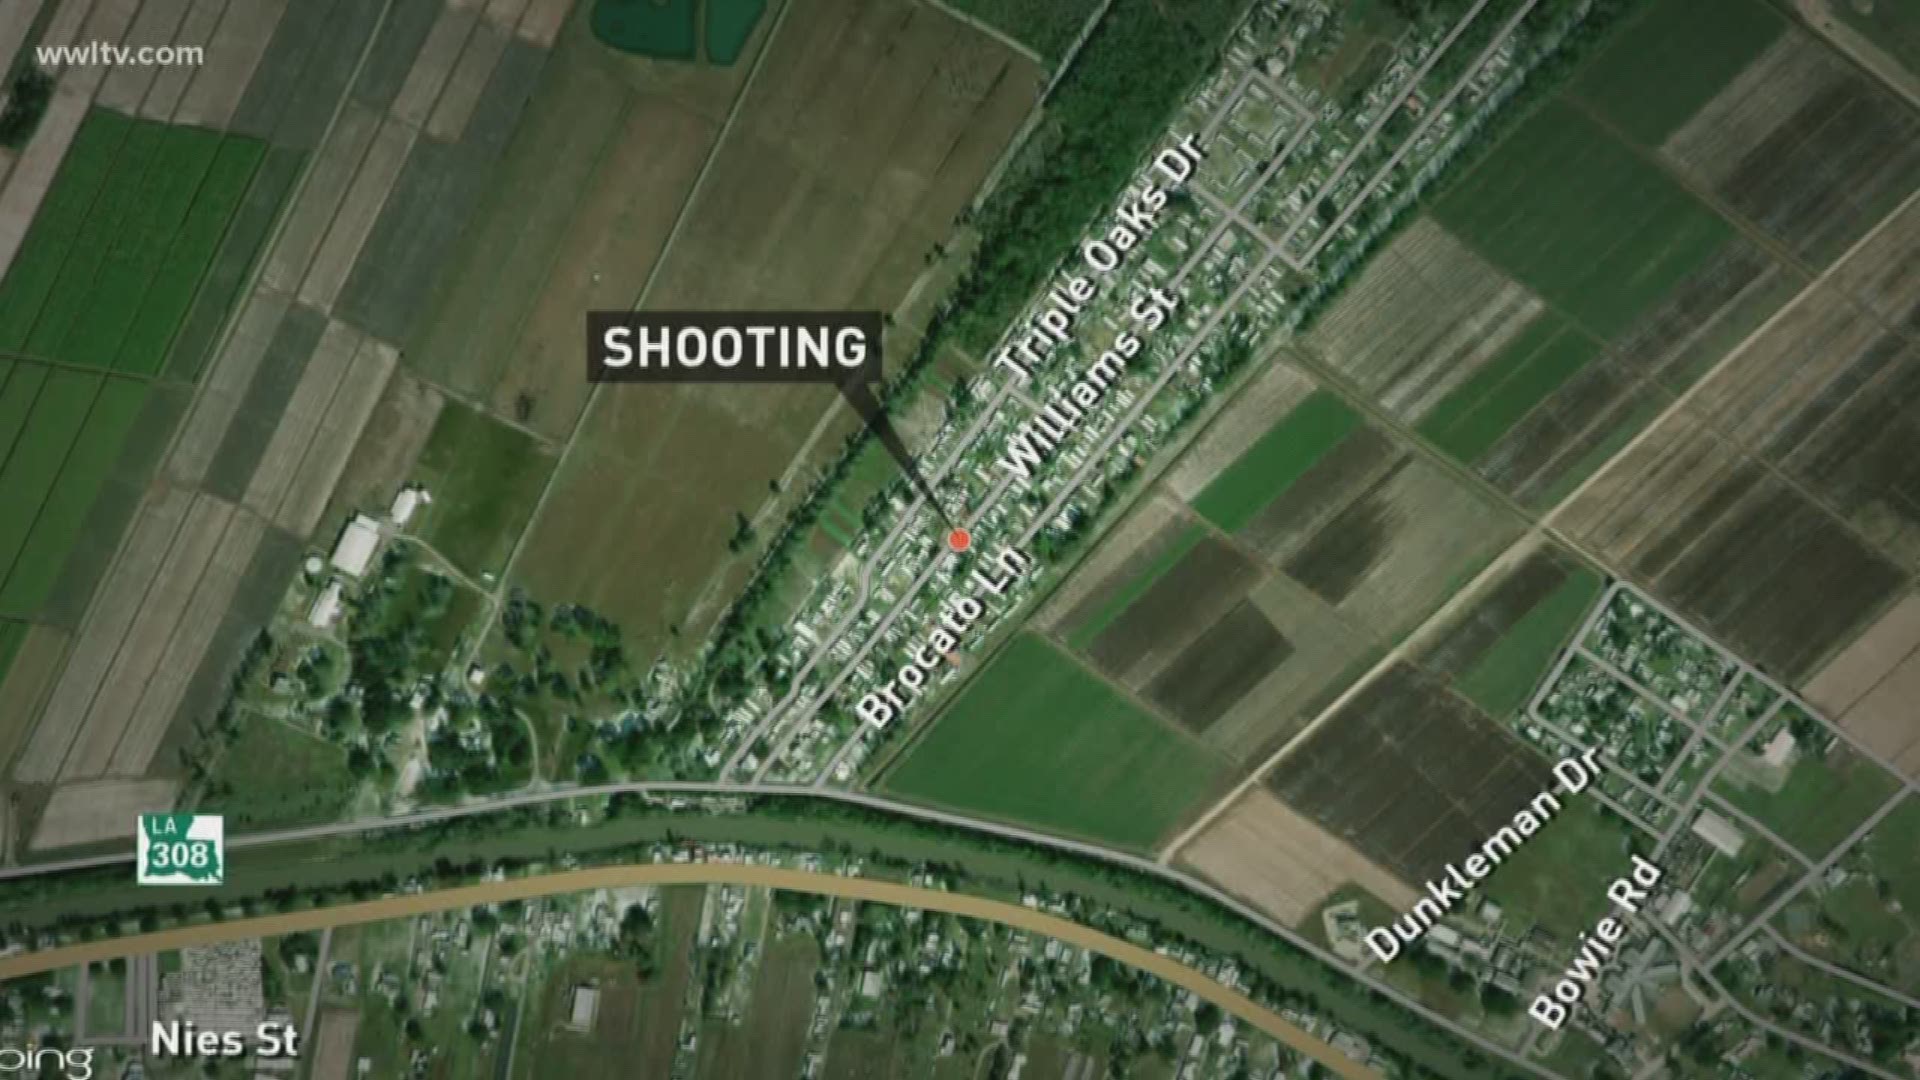 Officials said one man was killed in the shooting. 